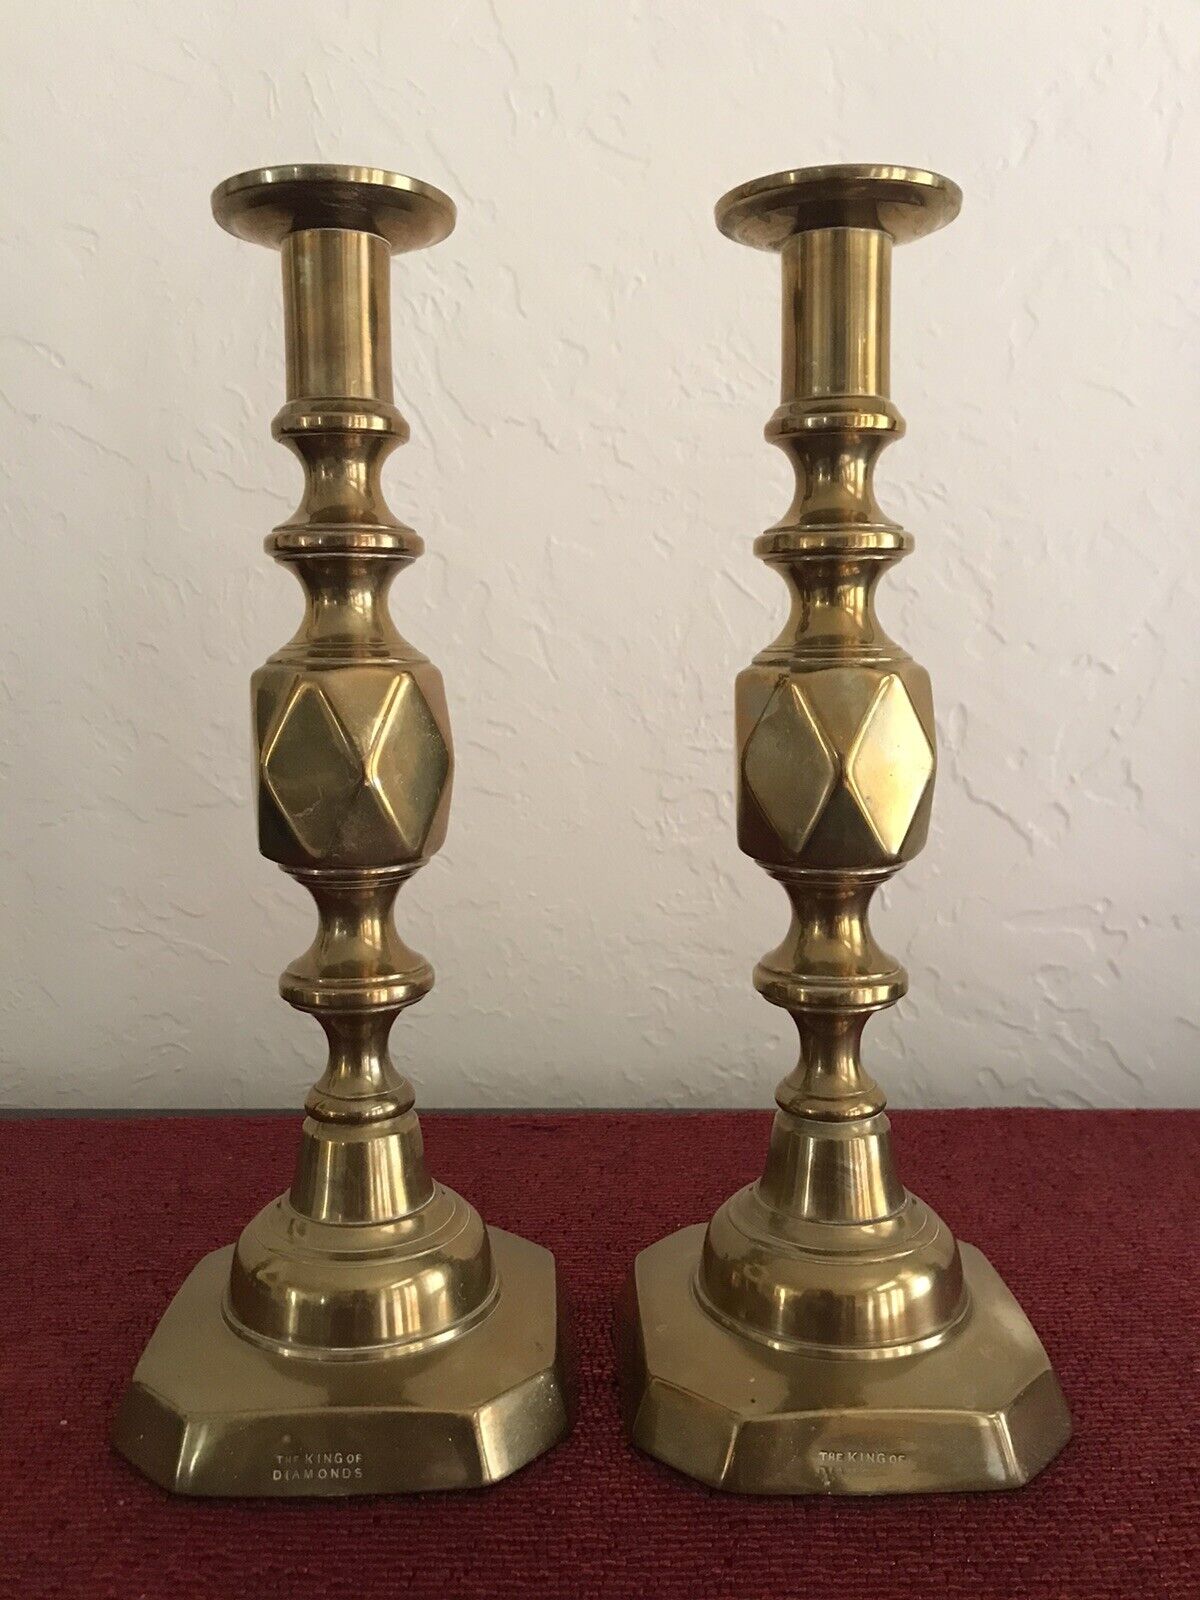 THE KING OF DIAMONDS Solid Brass Push-up English Candlesticks